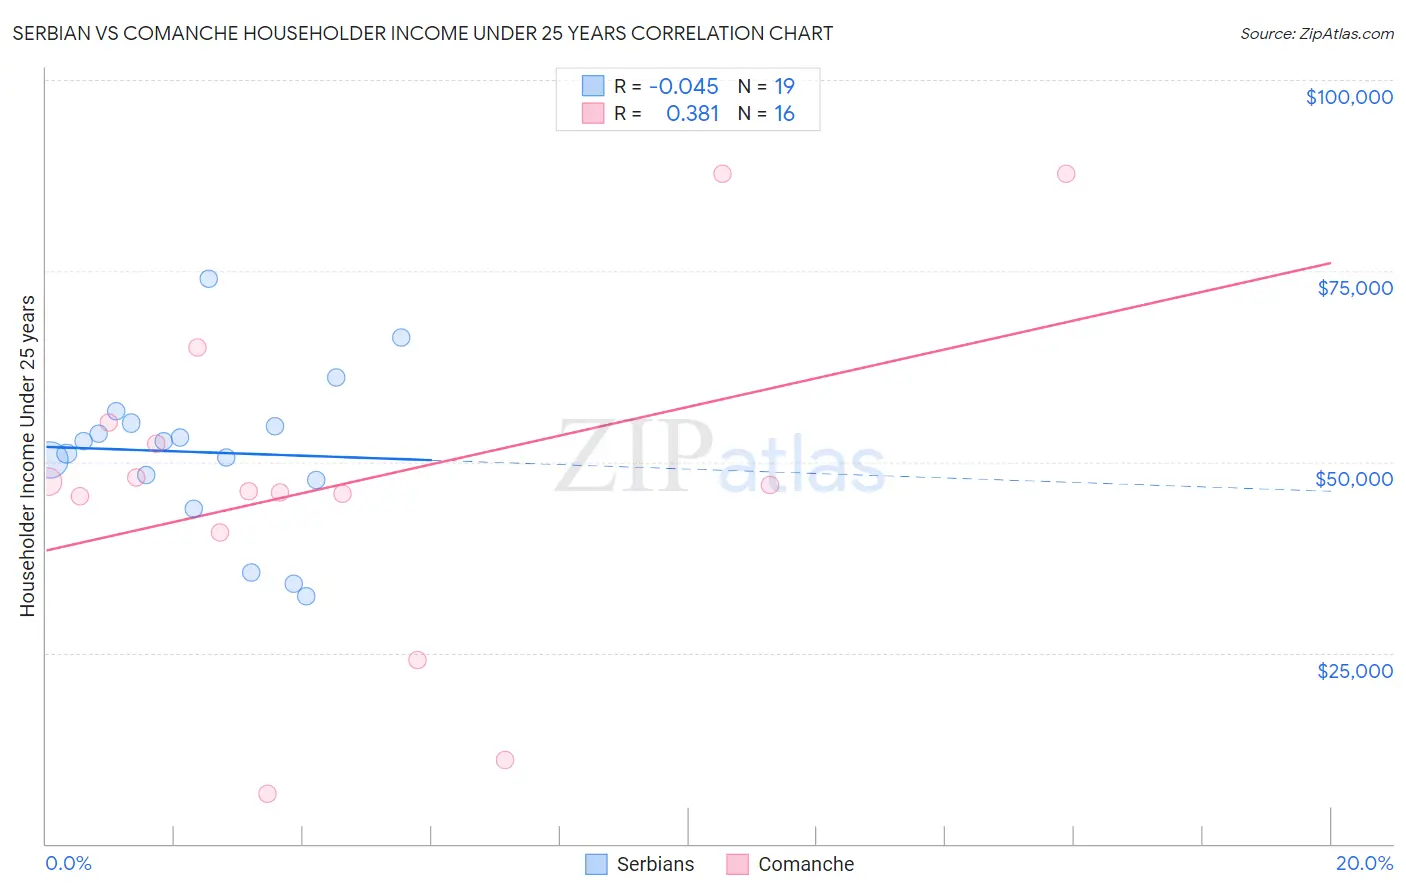 Serbian vs Comanche Householder Income Under 25 years